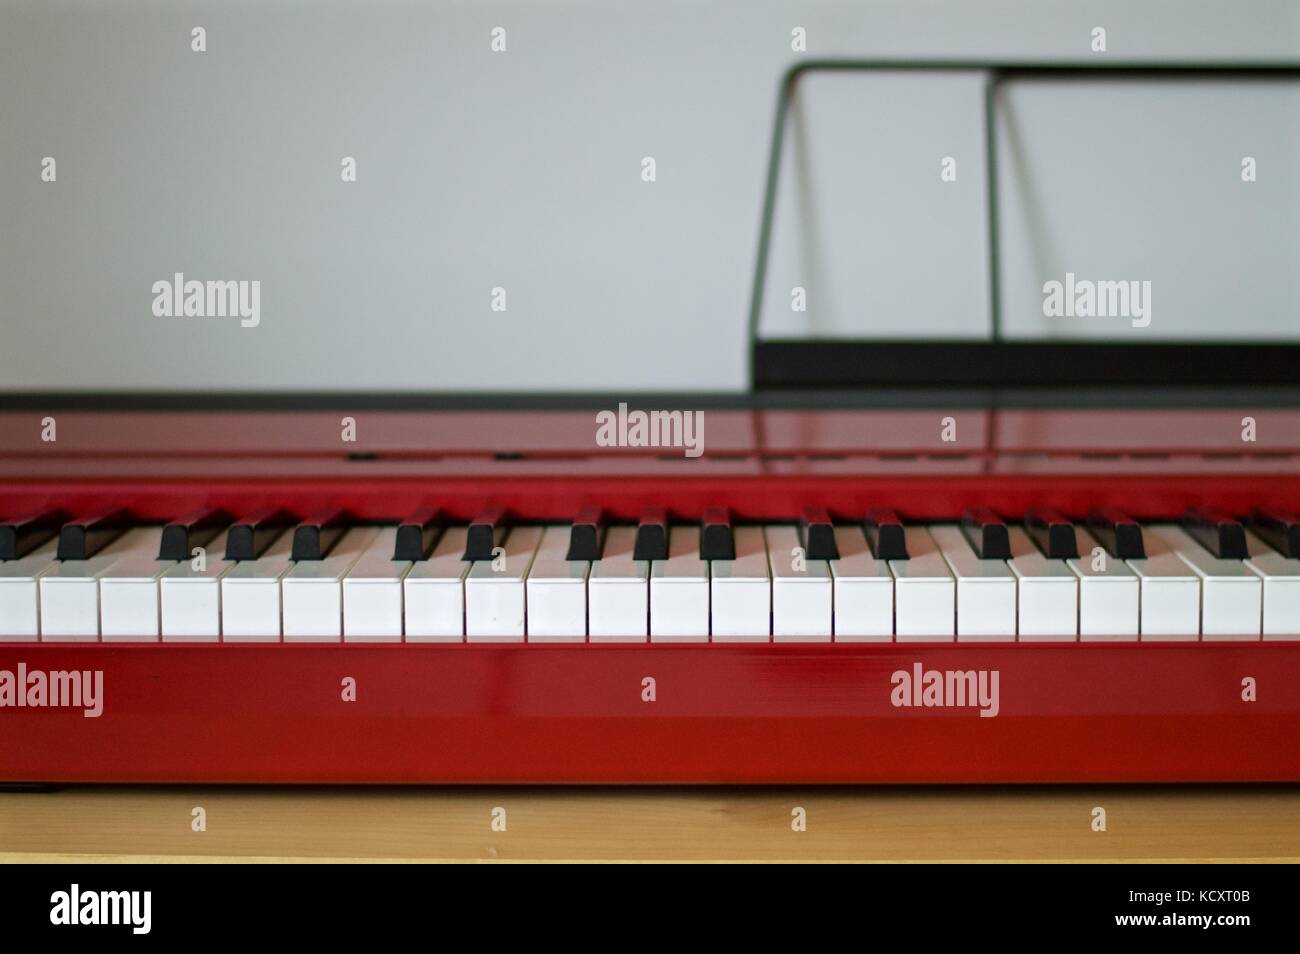 Roland Fp 8 High Resolution Stock Photography and Images - Alamy